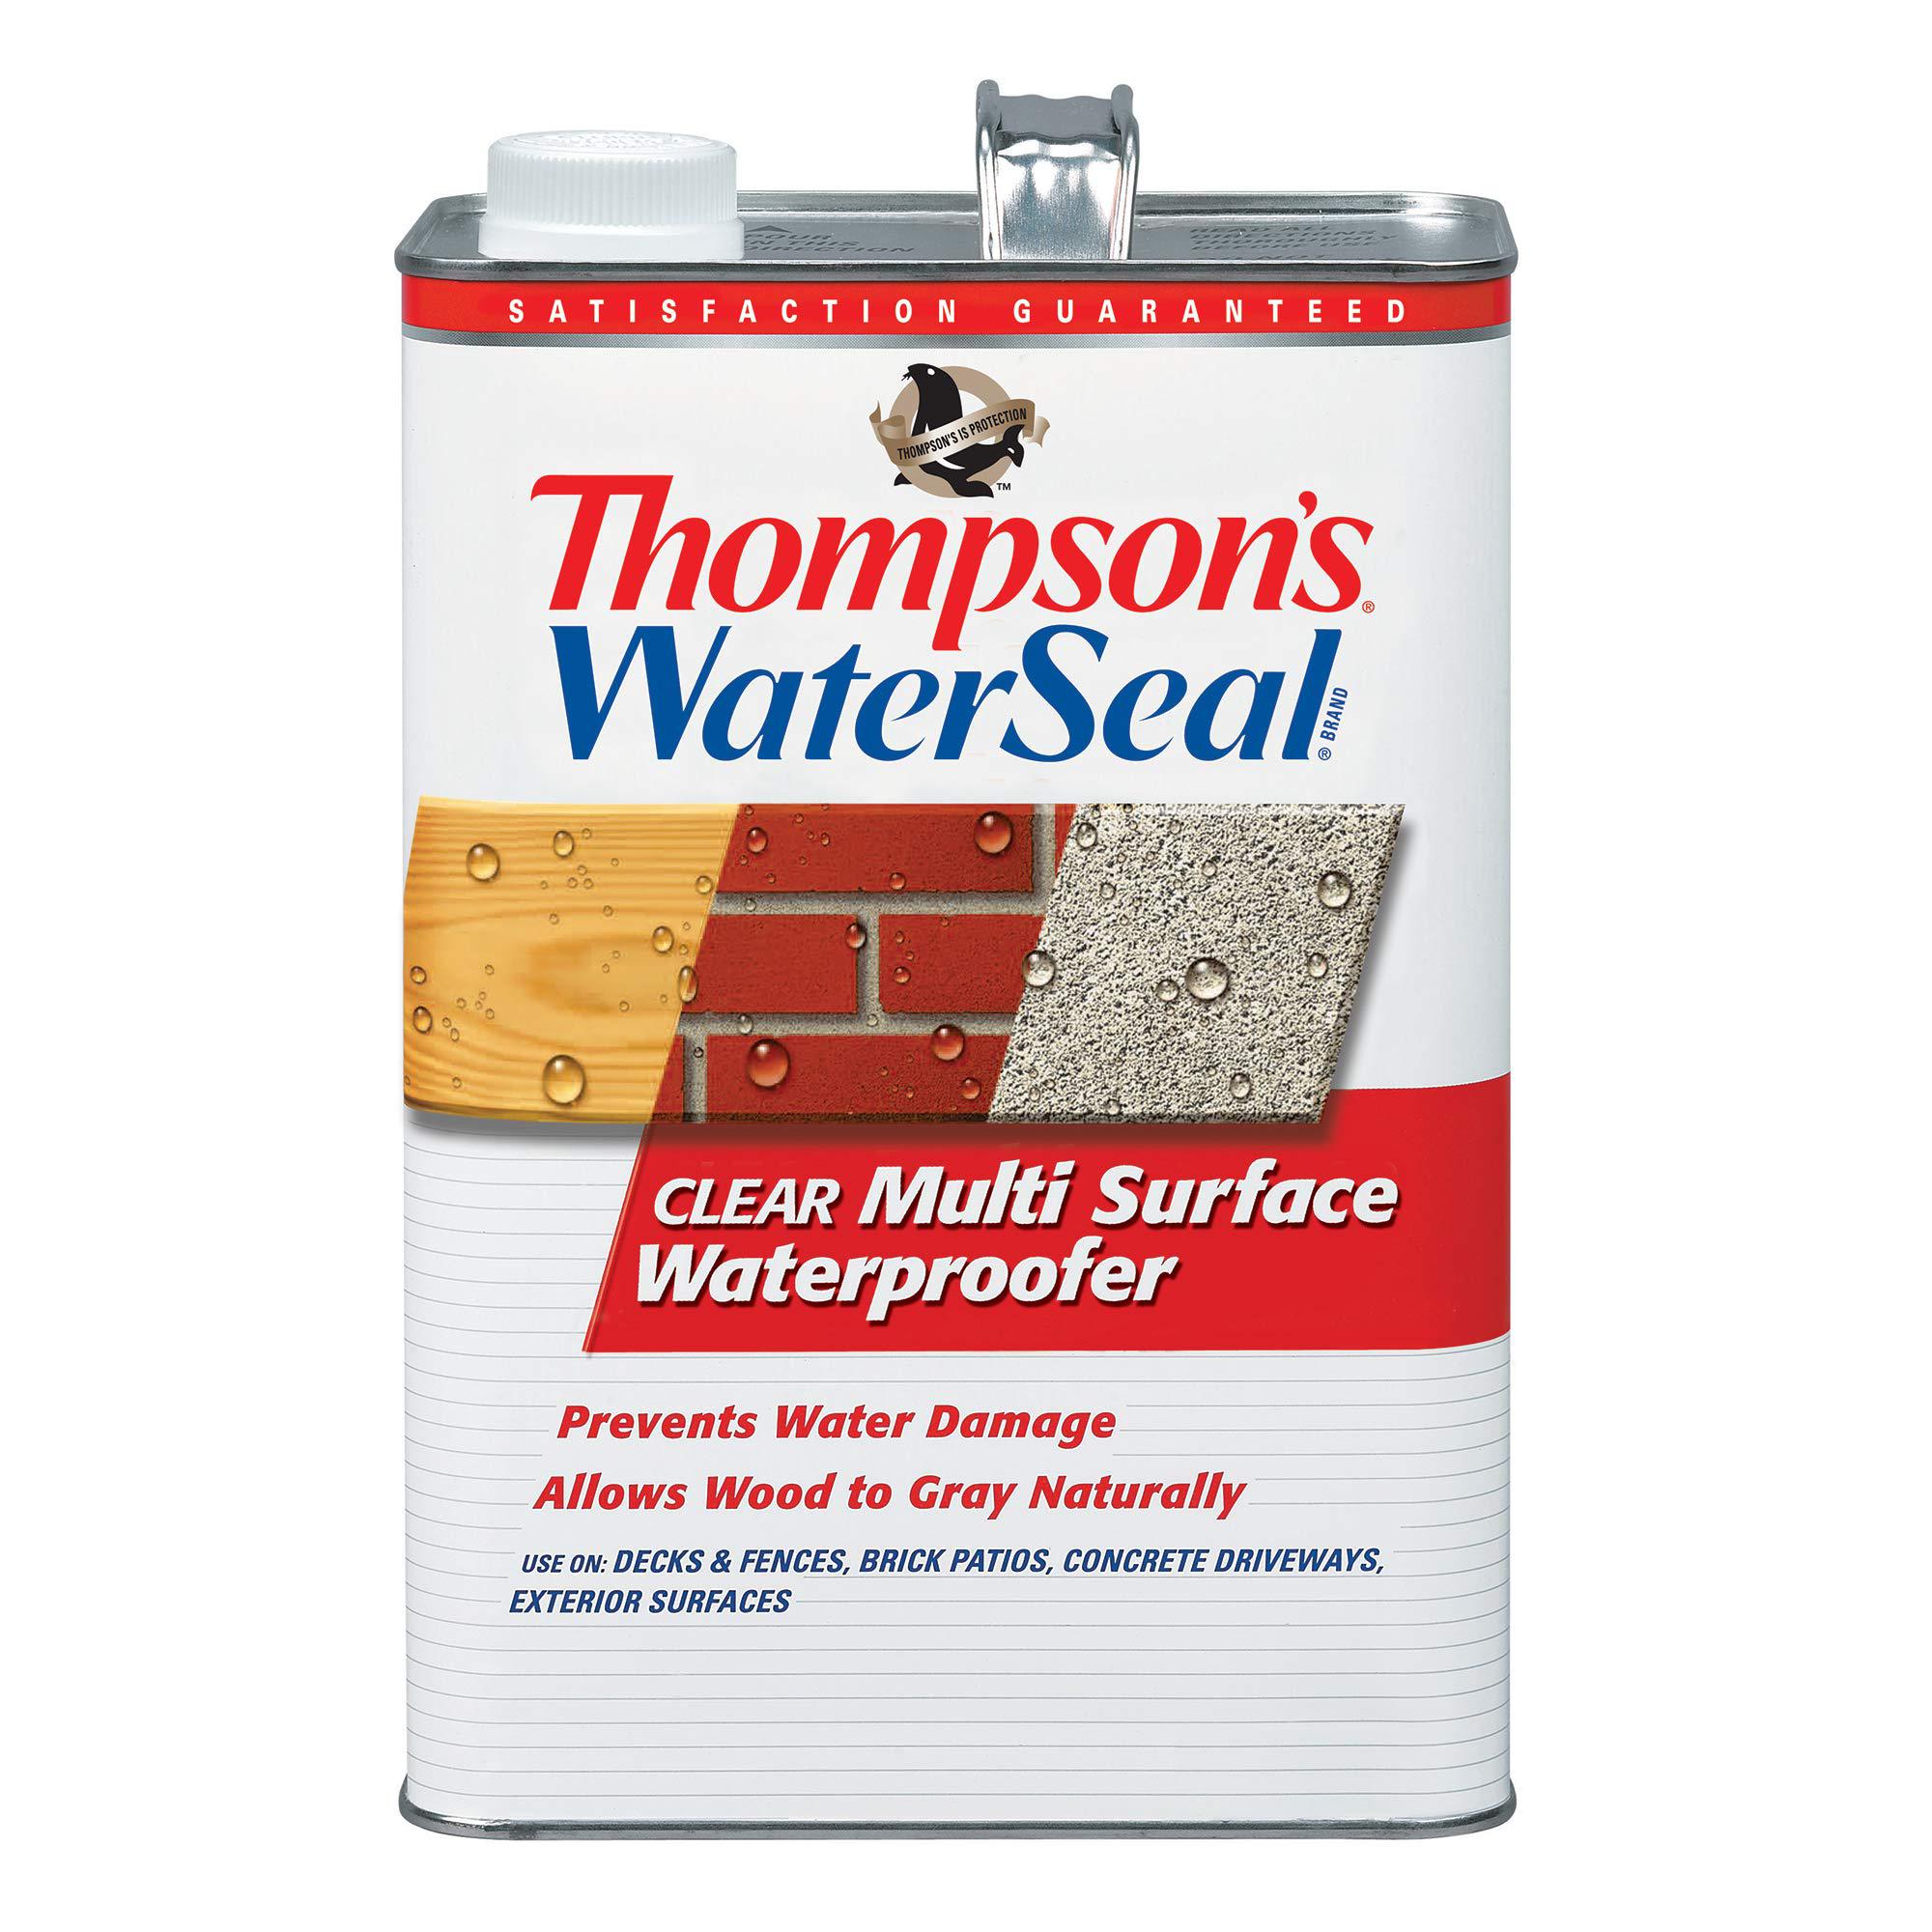 Thompsons Thompson's Water Sea Thompsons Water Seal TH.024101-16 Clear Multi-Surface Waterproofer, 1-Gallon